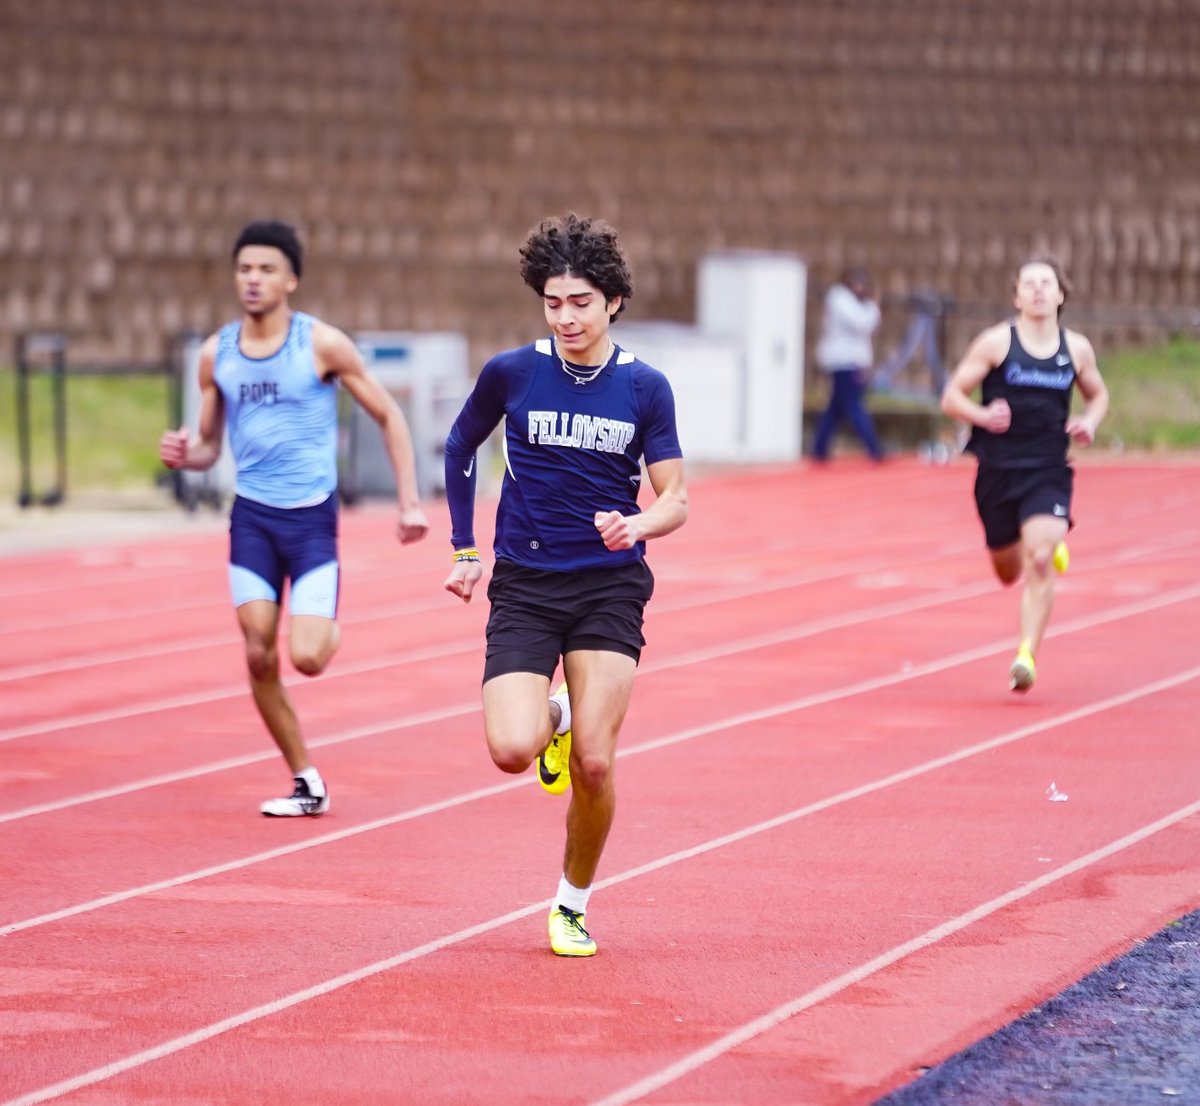 Check out some images from the track & field season! Thanks Milo Falcon! fellowshipchristianschool.org/updated-athlet…